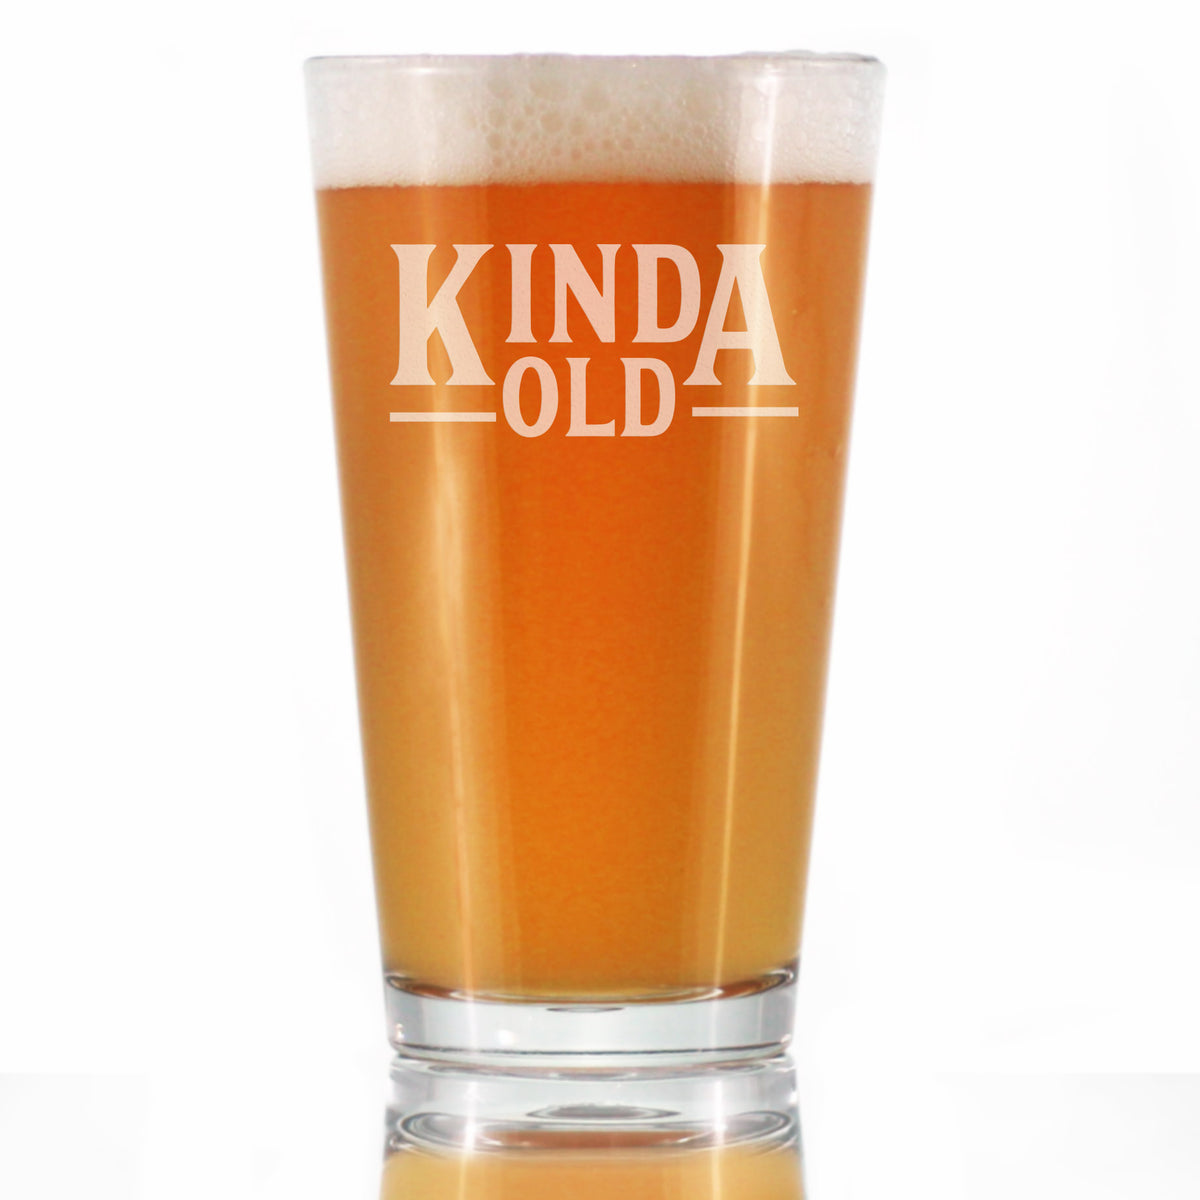 Kinda Old - Funny 16 oz Pint Glass for Beer - Birthday Gifts for Men or Women Getting Older - Fun Bday Party Decor